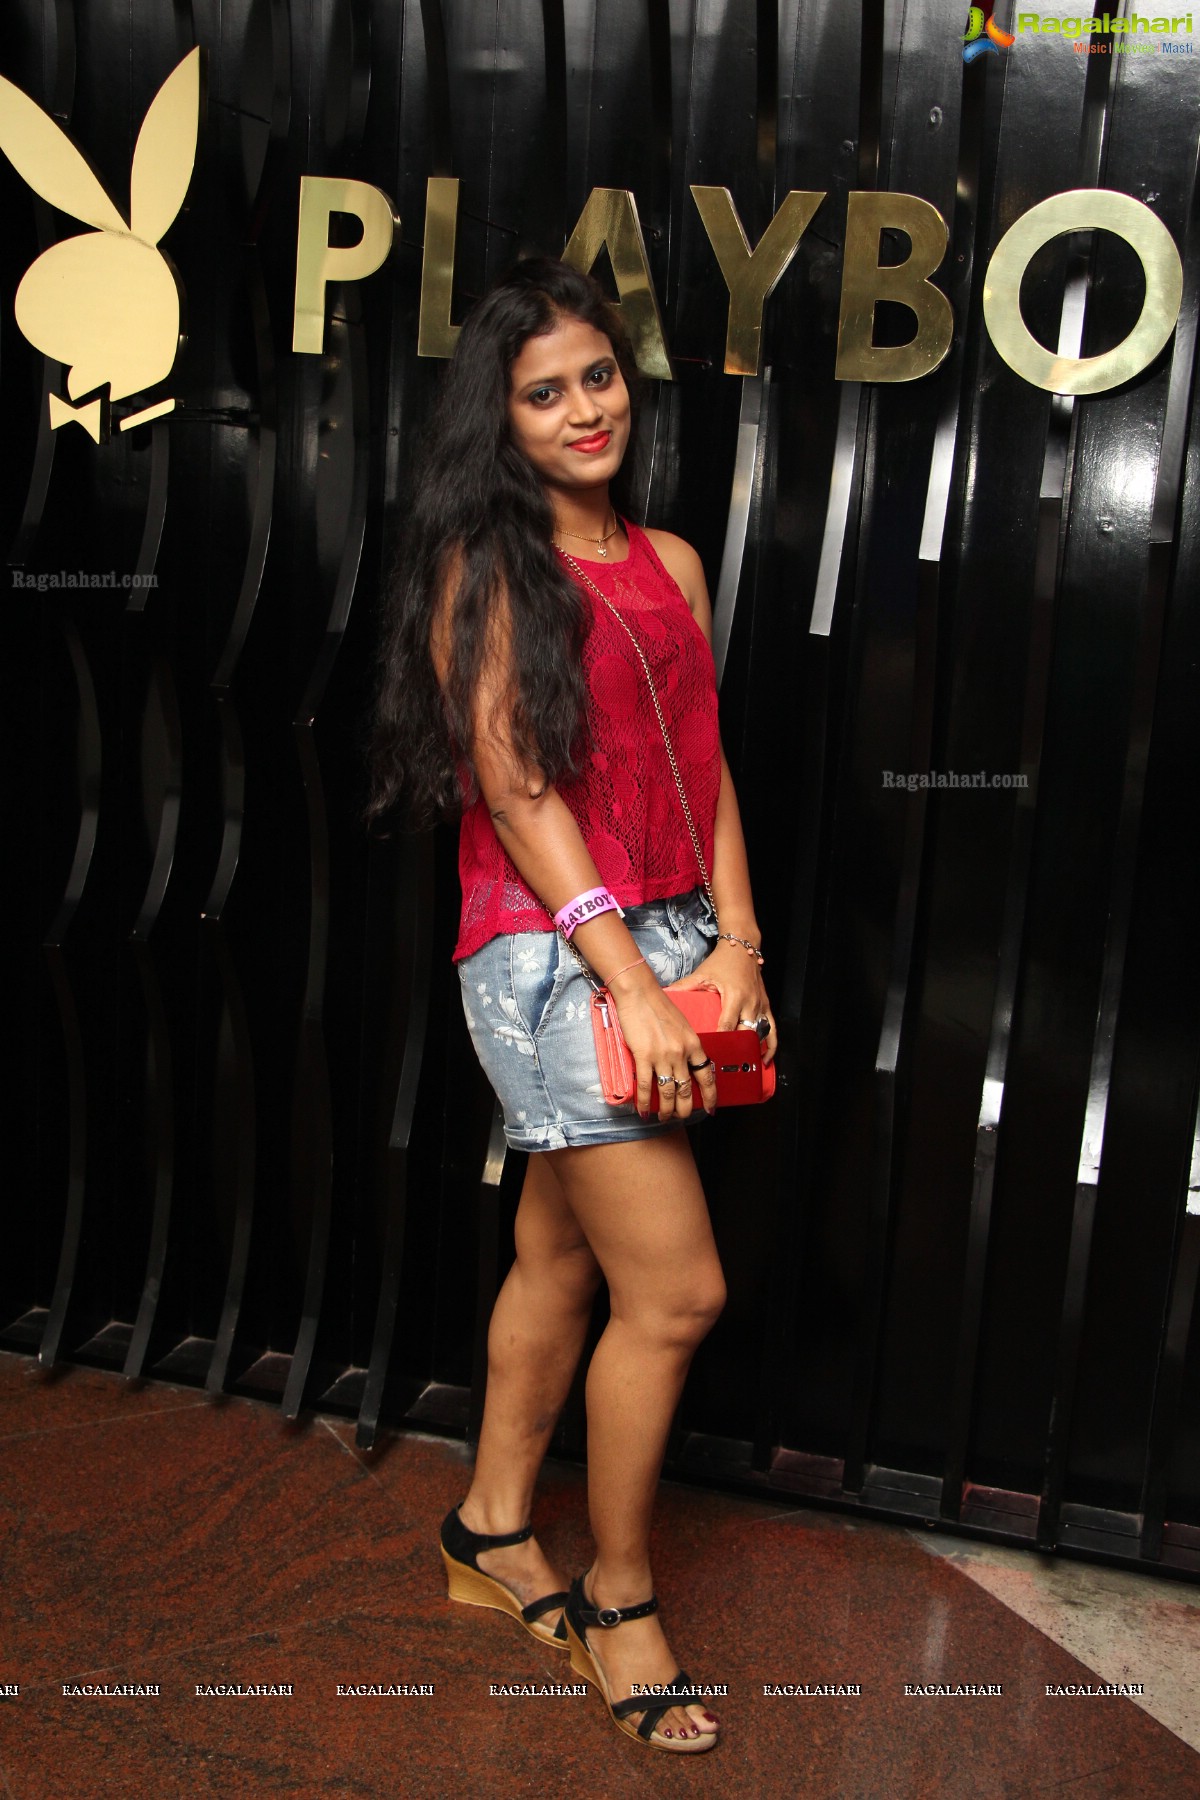 EDM Saturday with 'Rave & Crave' at Playboy Club Hyderabad